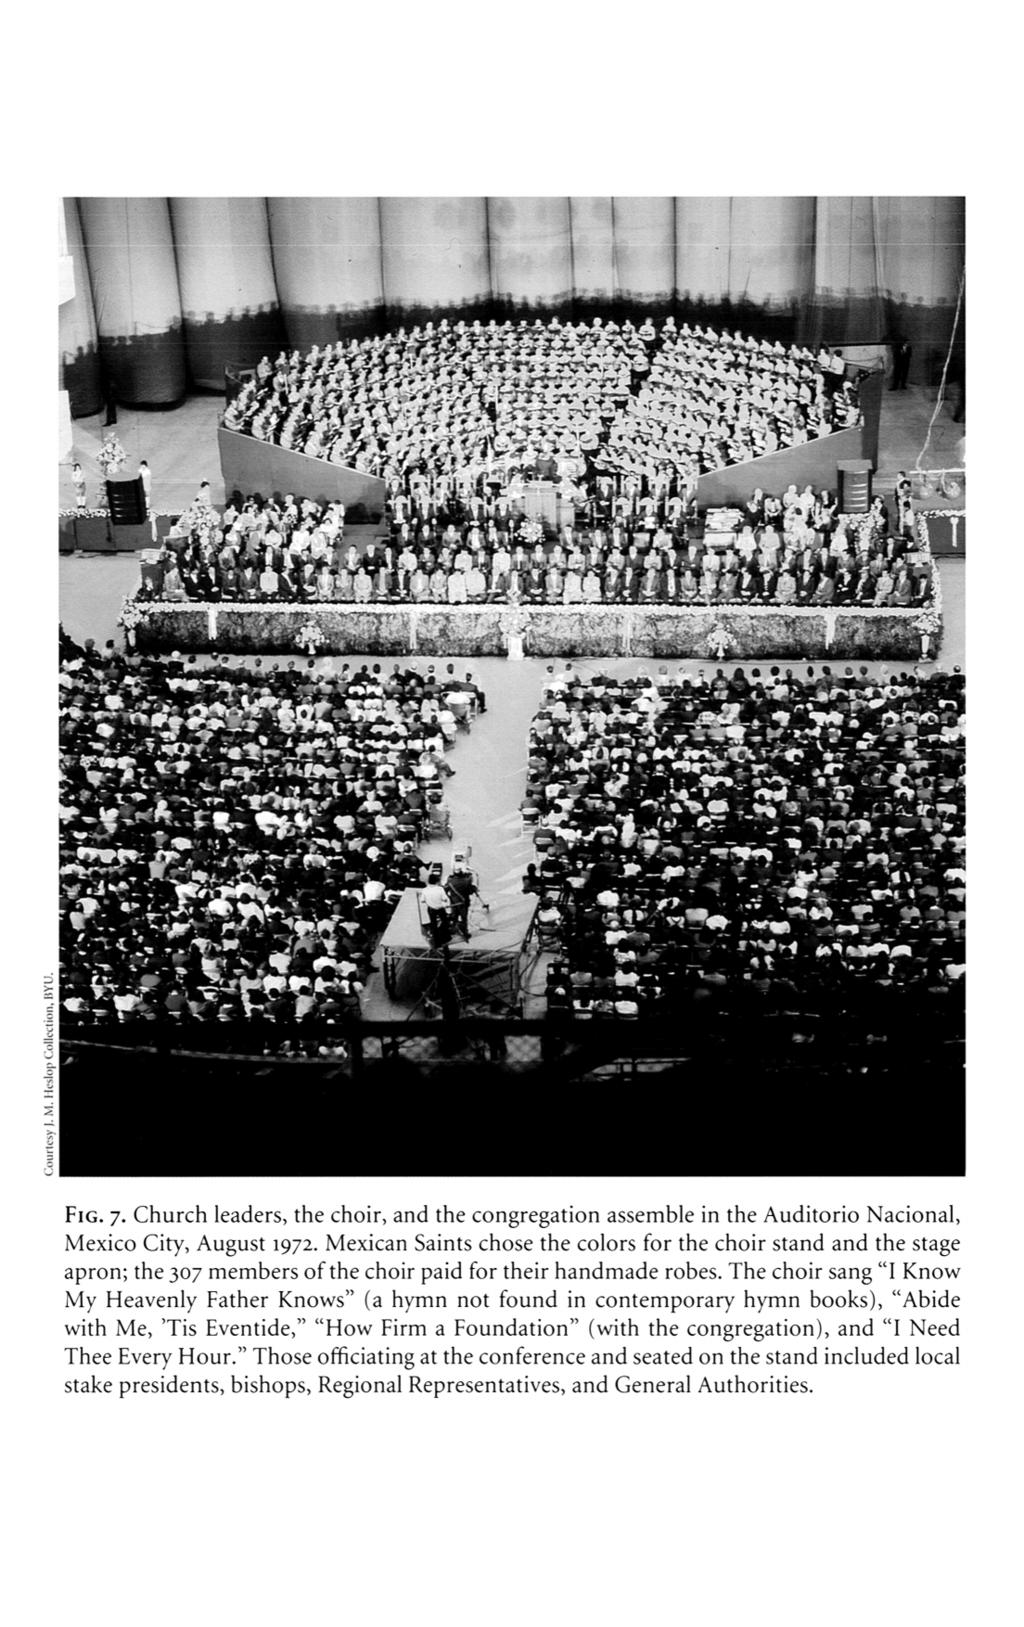 Holzapfel and Lambert: Photographs of the First Mexico and Central America Area Conferen FIG 7 church leaders the choir and the congregation assemble in the auditoria auditorio Au nacional mexico